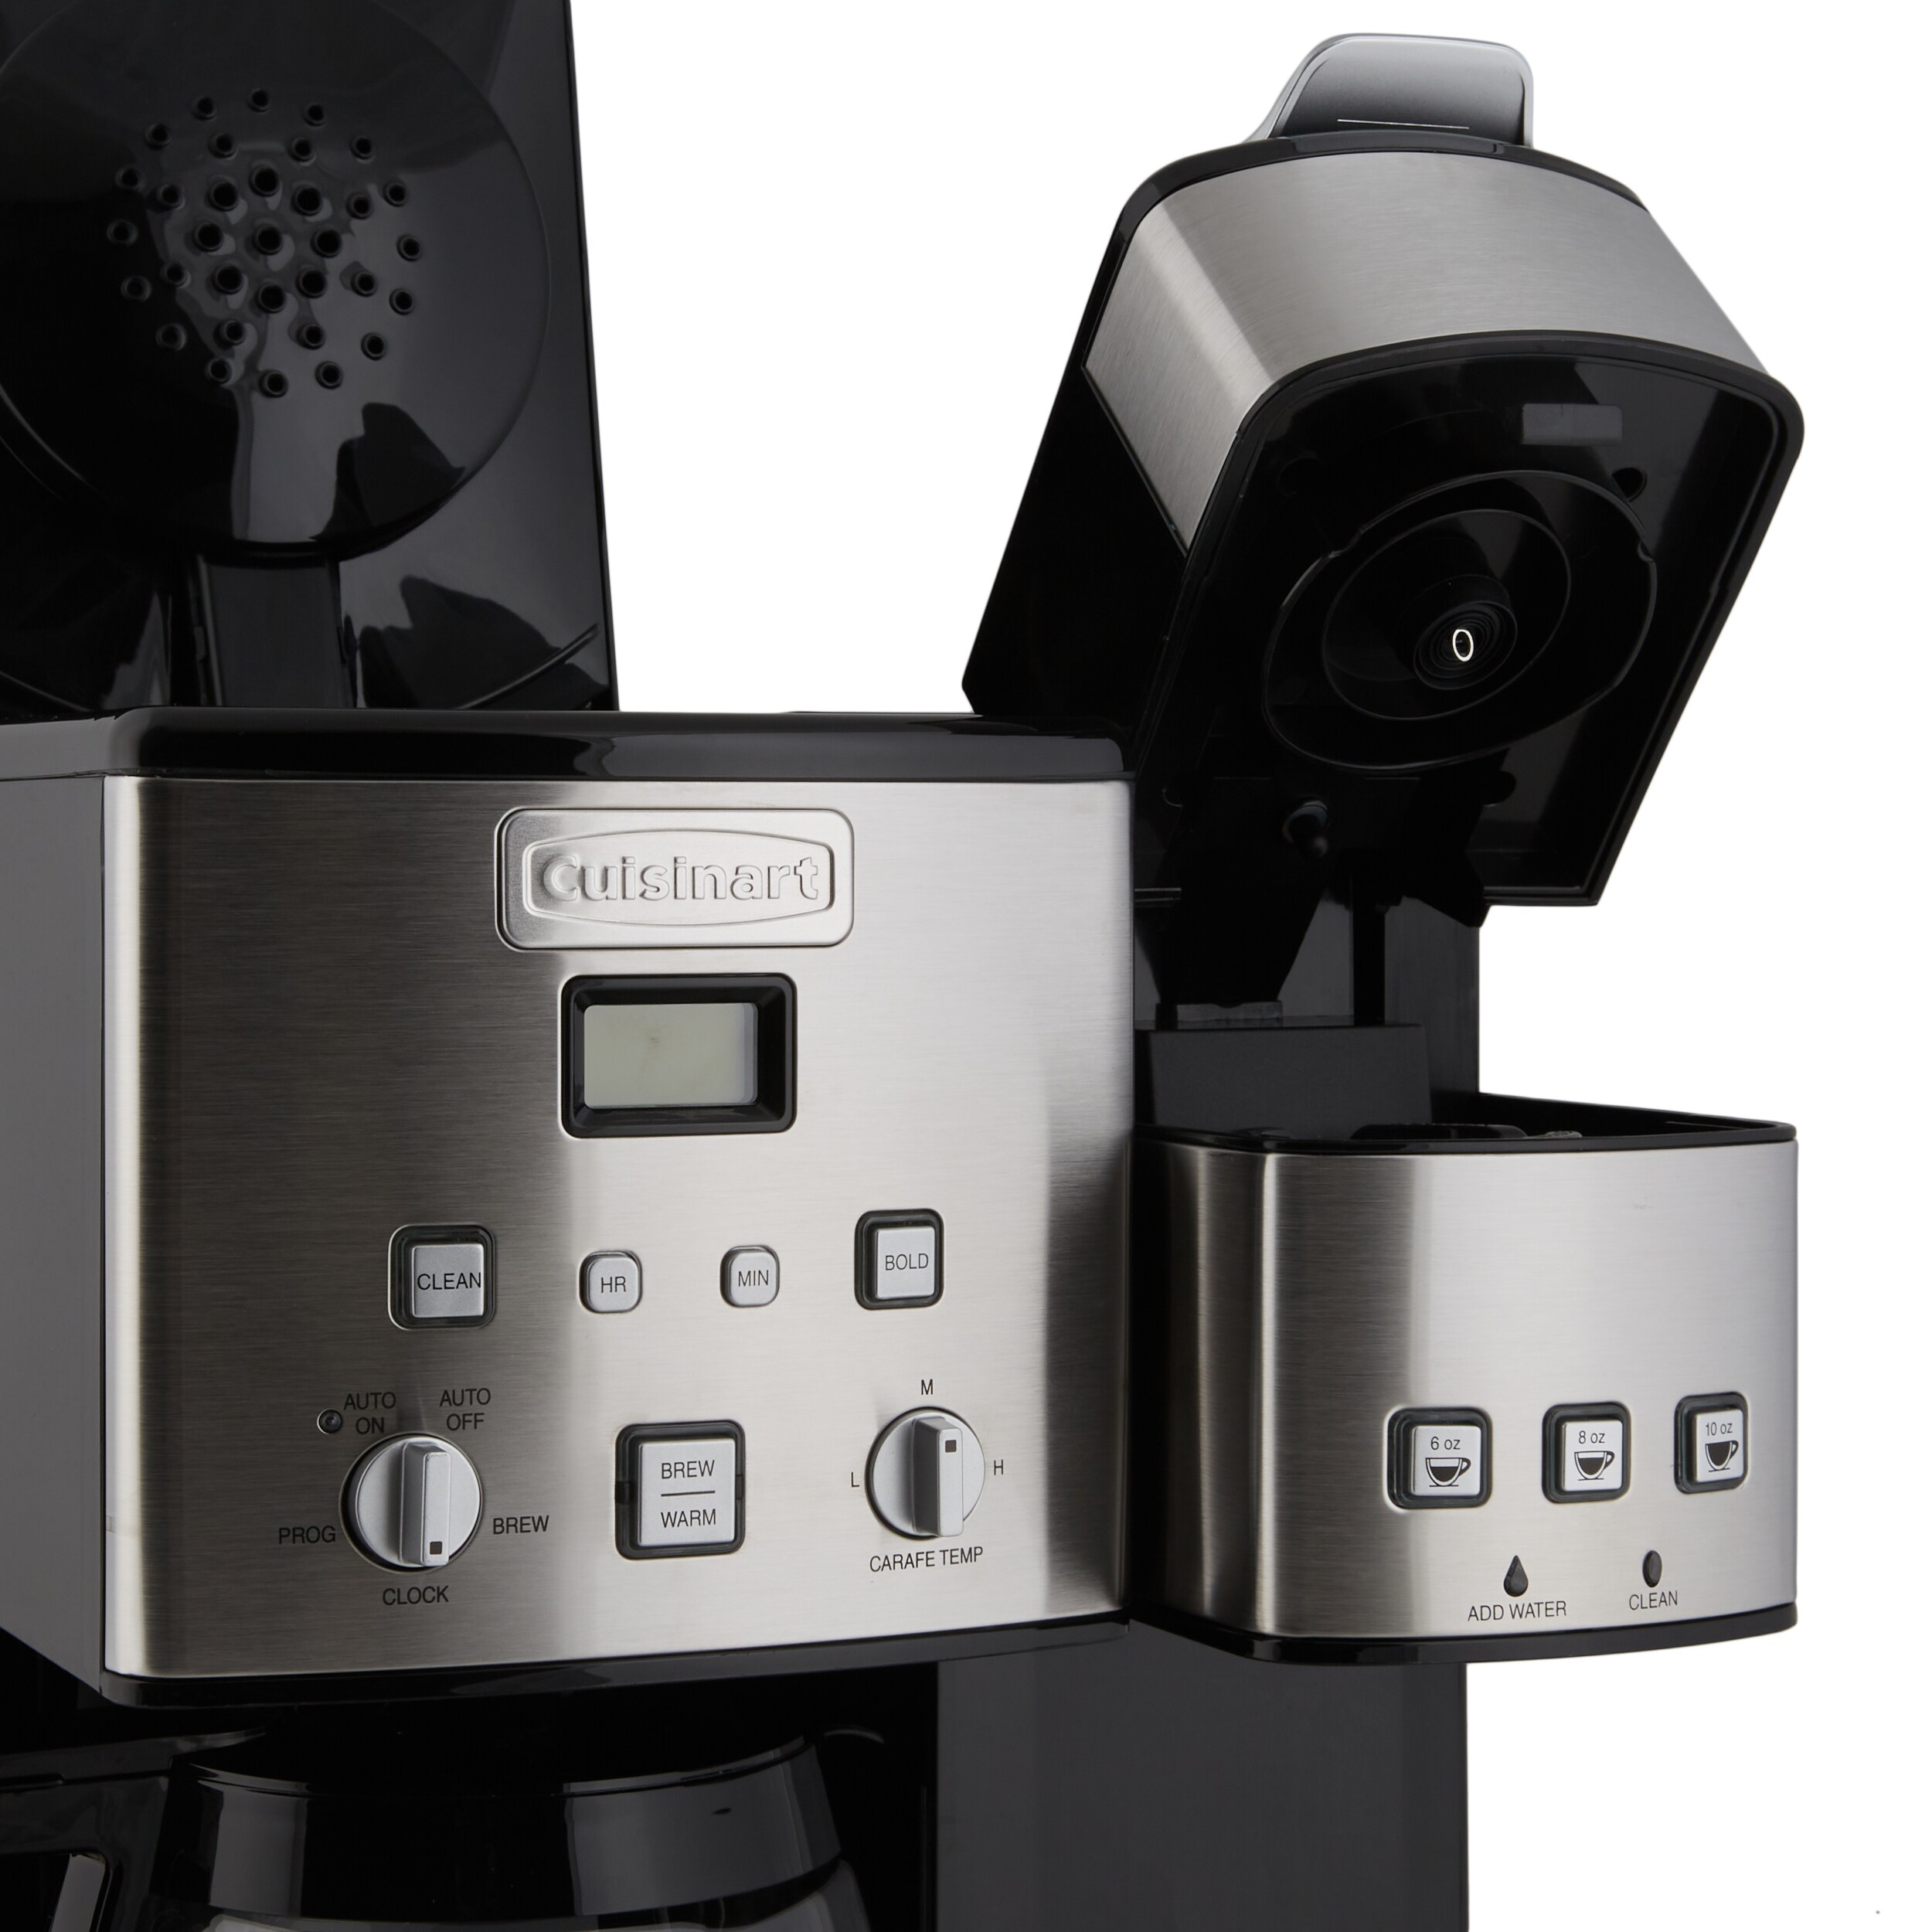 15 12-volt coffee makers for RV's (And other options for a cup of